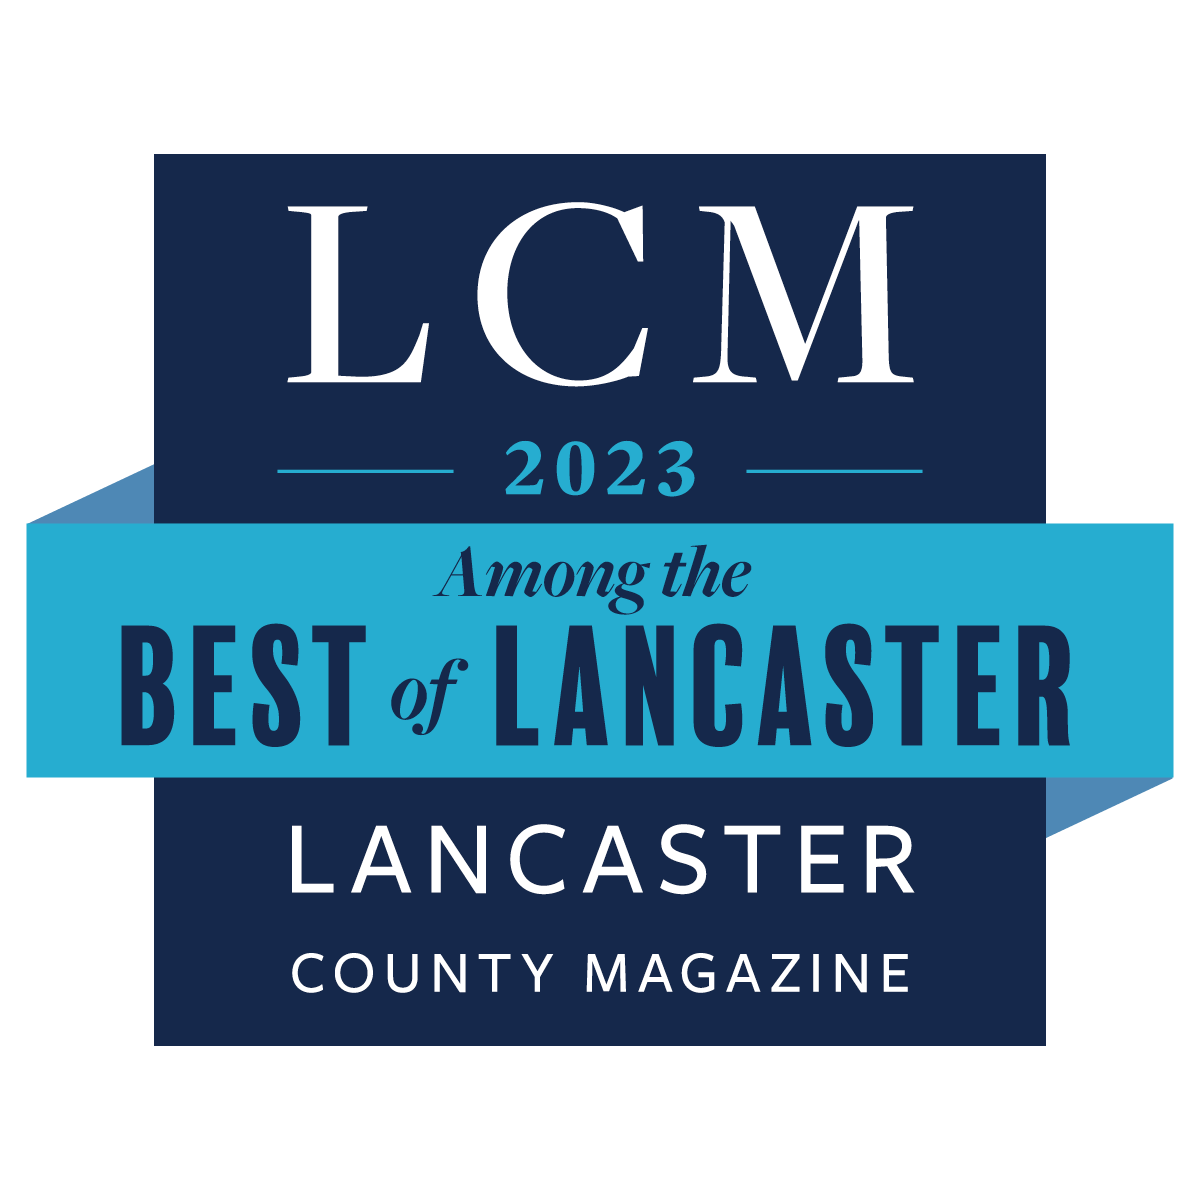 the logo for lcm among the best of lancaster county magazine